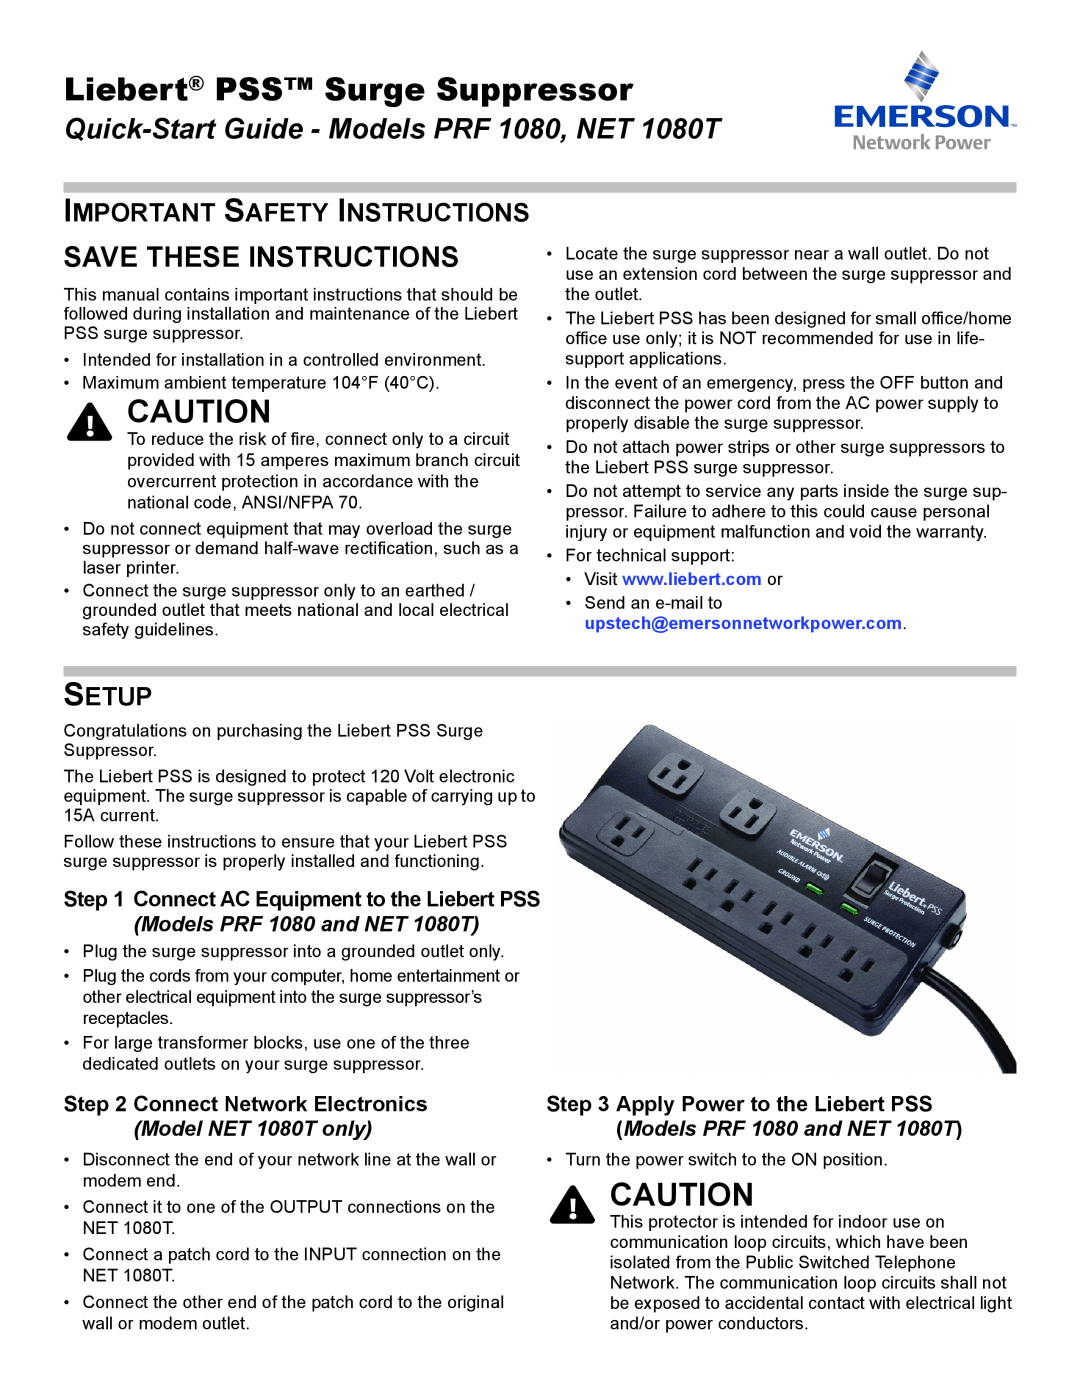 Emerson NET 1080T quick start Important Safety Instructions, Setup, Connect Network Electronics, Save These Instructions 